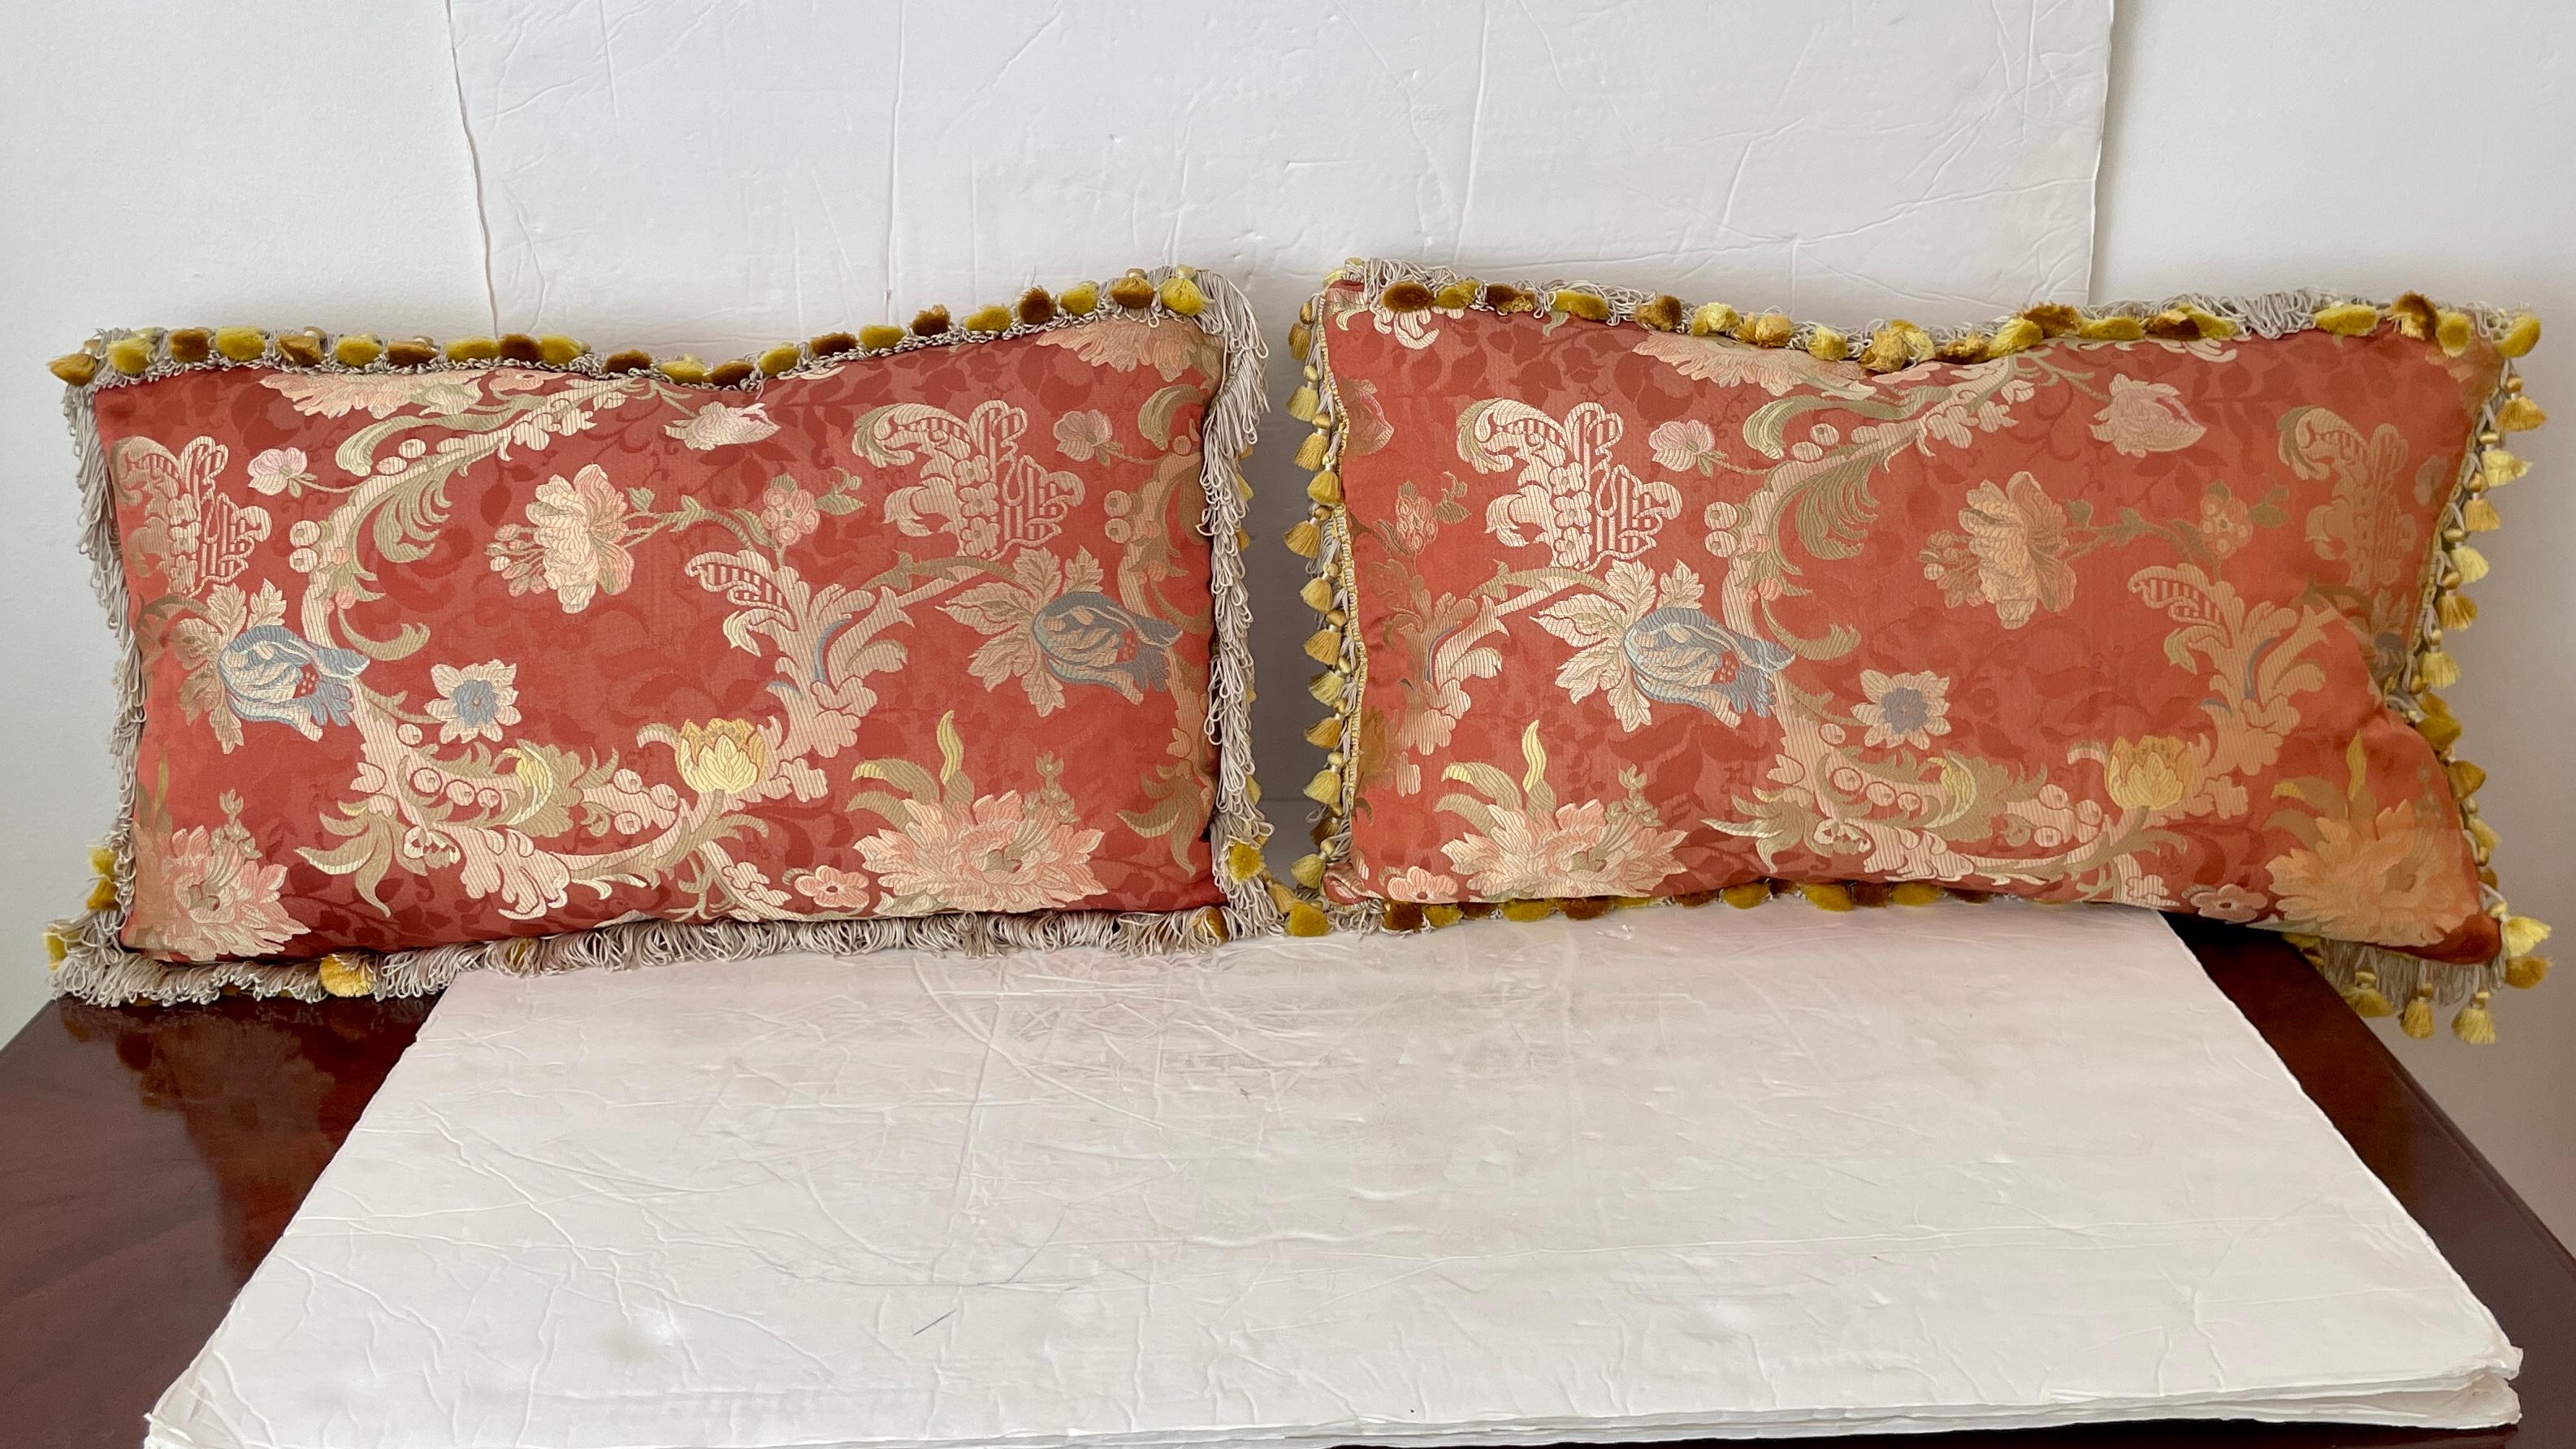 Beautiful pair of French decorative rectangular pillows. Beautiful colors and embroidery.